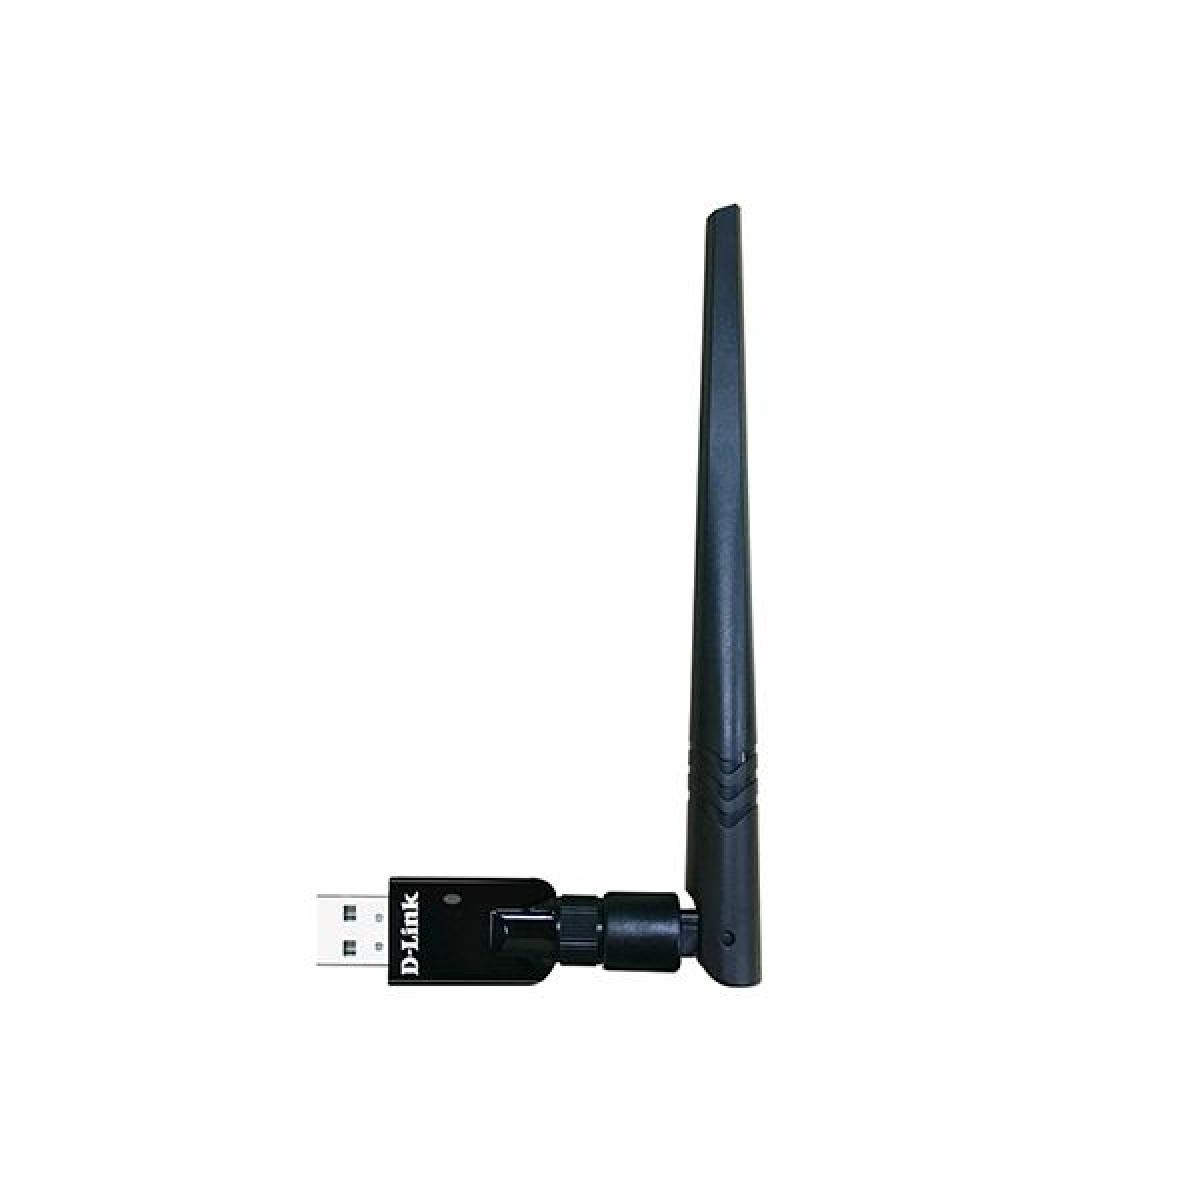 D-Link DWA-172 Wireless AC600 Dual Band USB Adapter with External Detachable Antenna